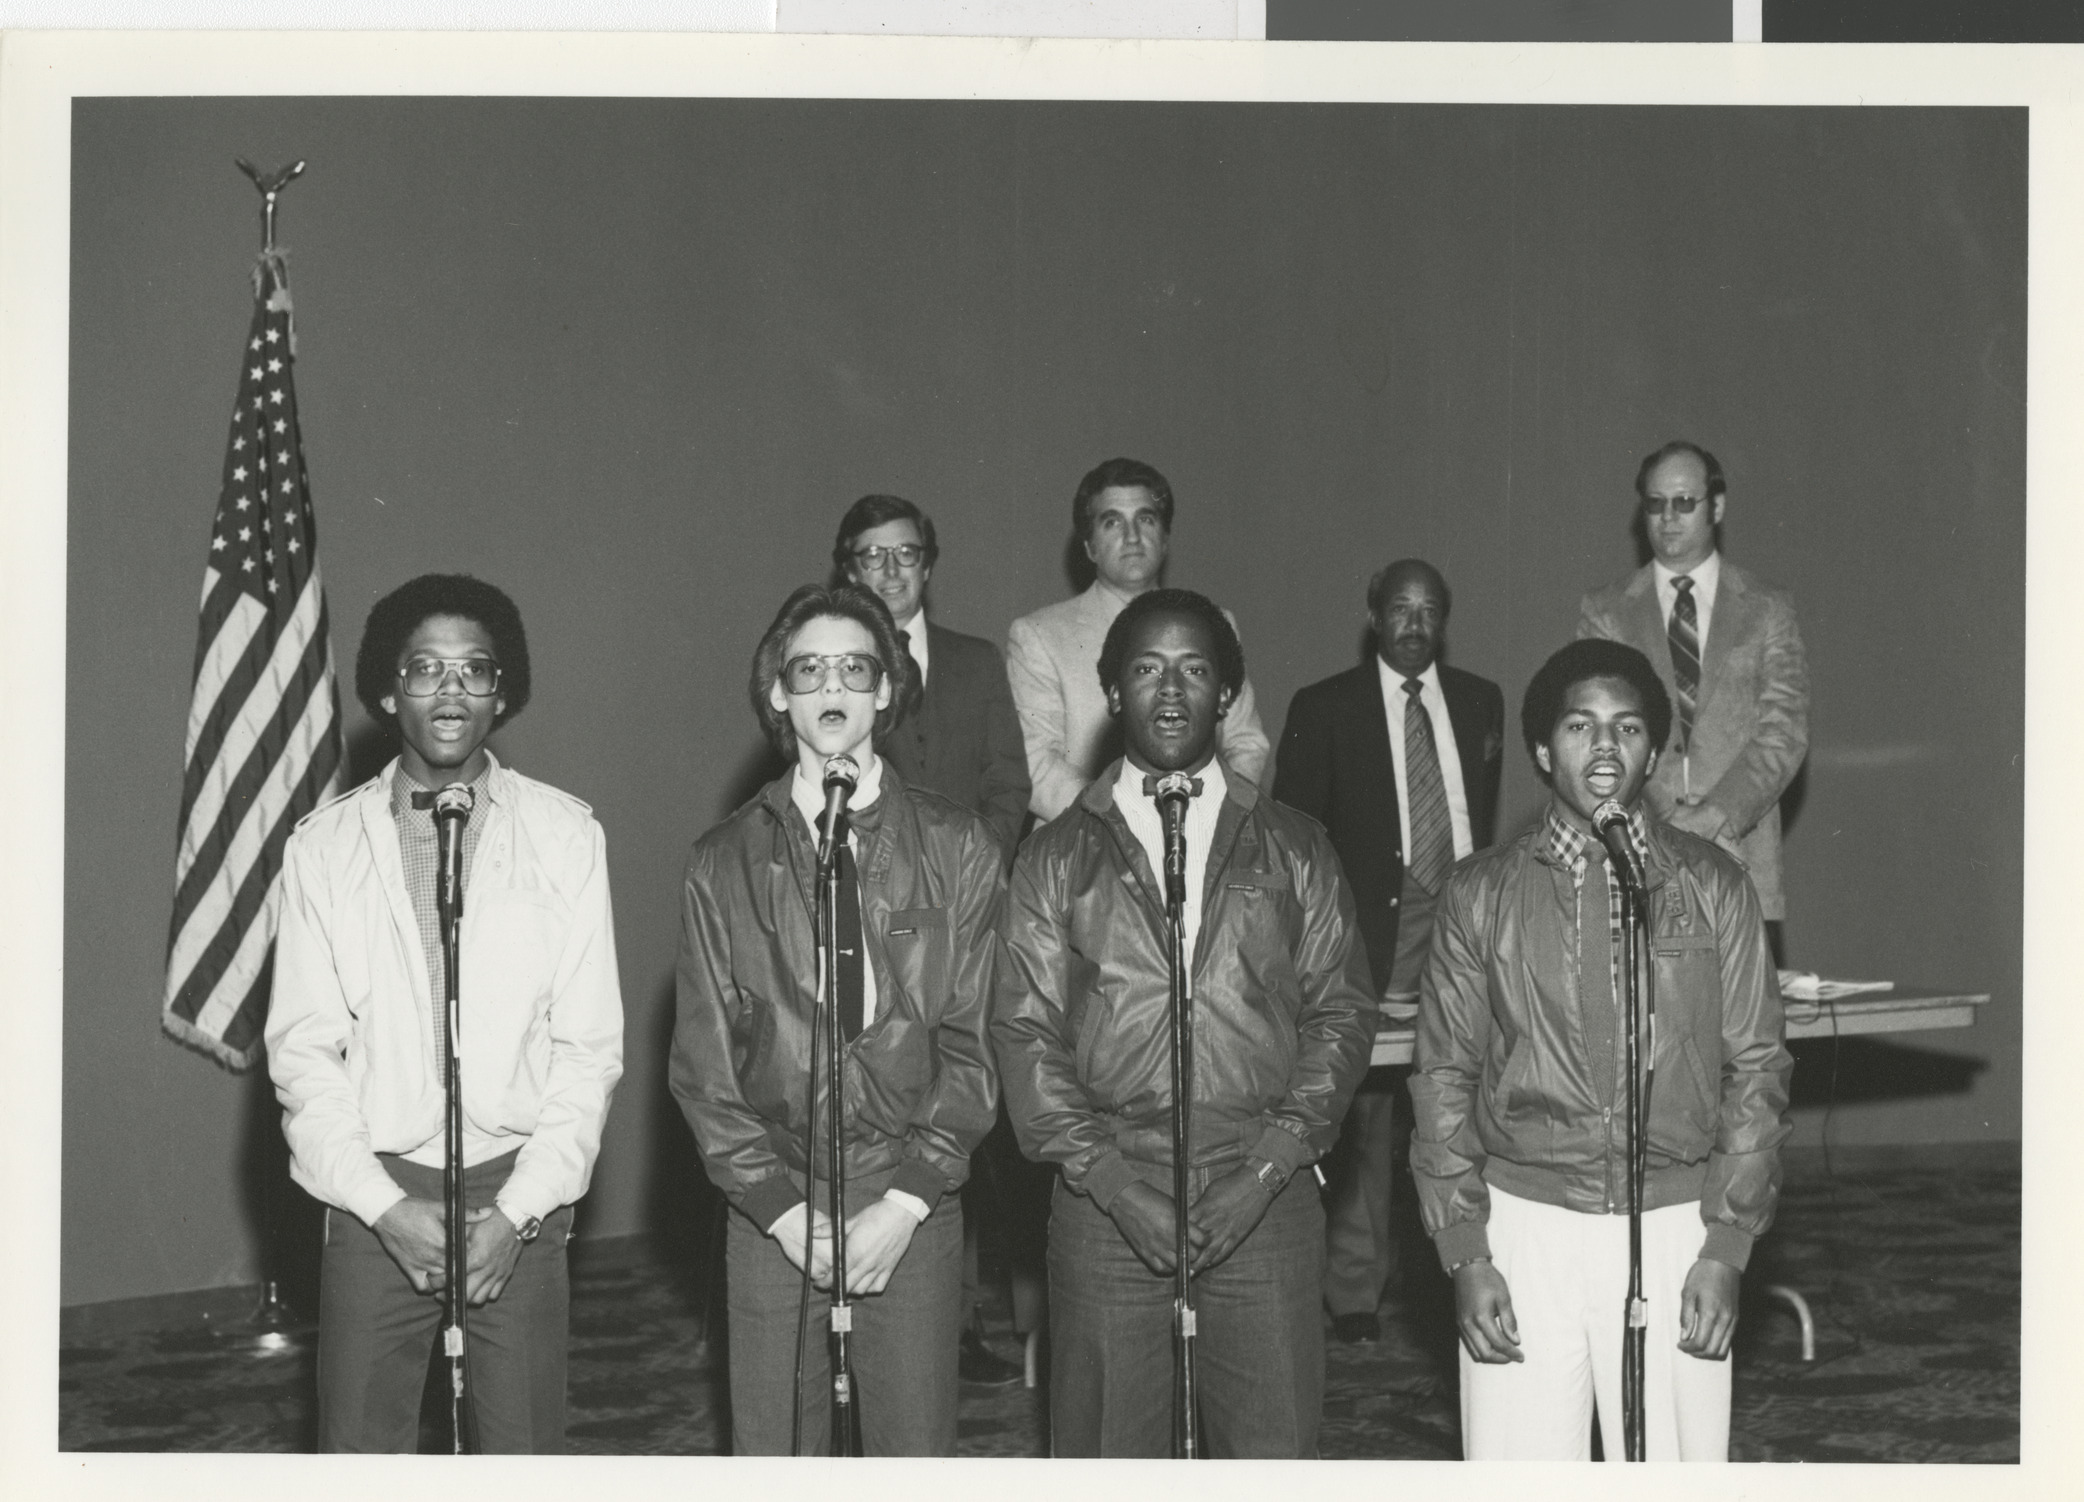 Photograph of Exdex Singing Group performing (Governor List and Ron Lurie in the background)